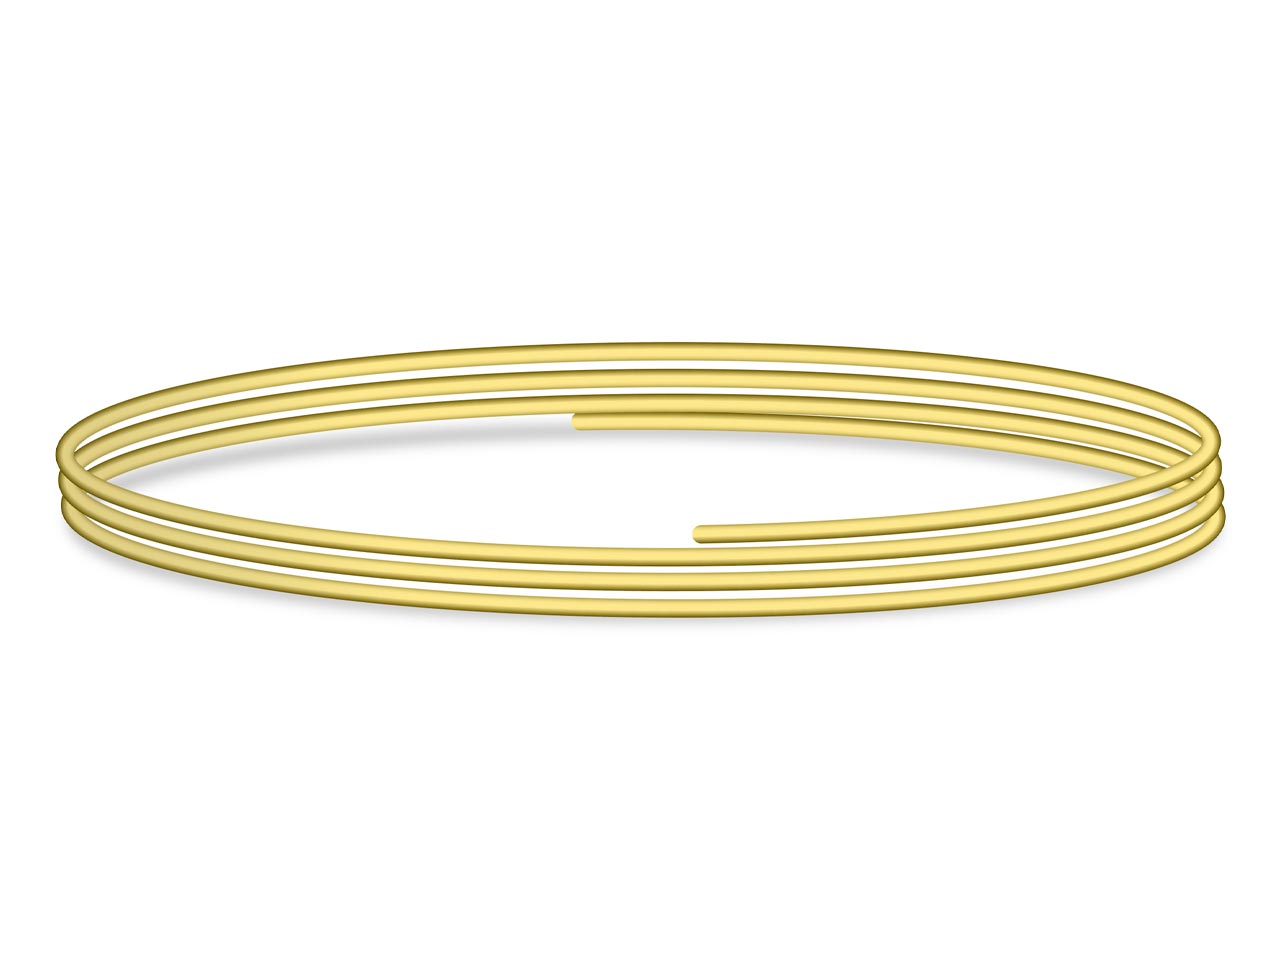 9ct Yellow Gold Round Wire 1.00mm X 100mm, Fully Annealed, 100% Recycled Gold Questions & Answers